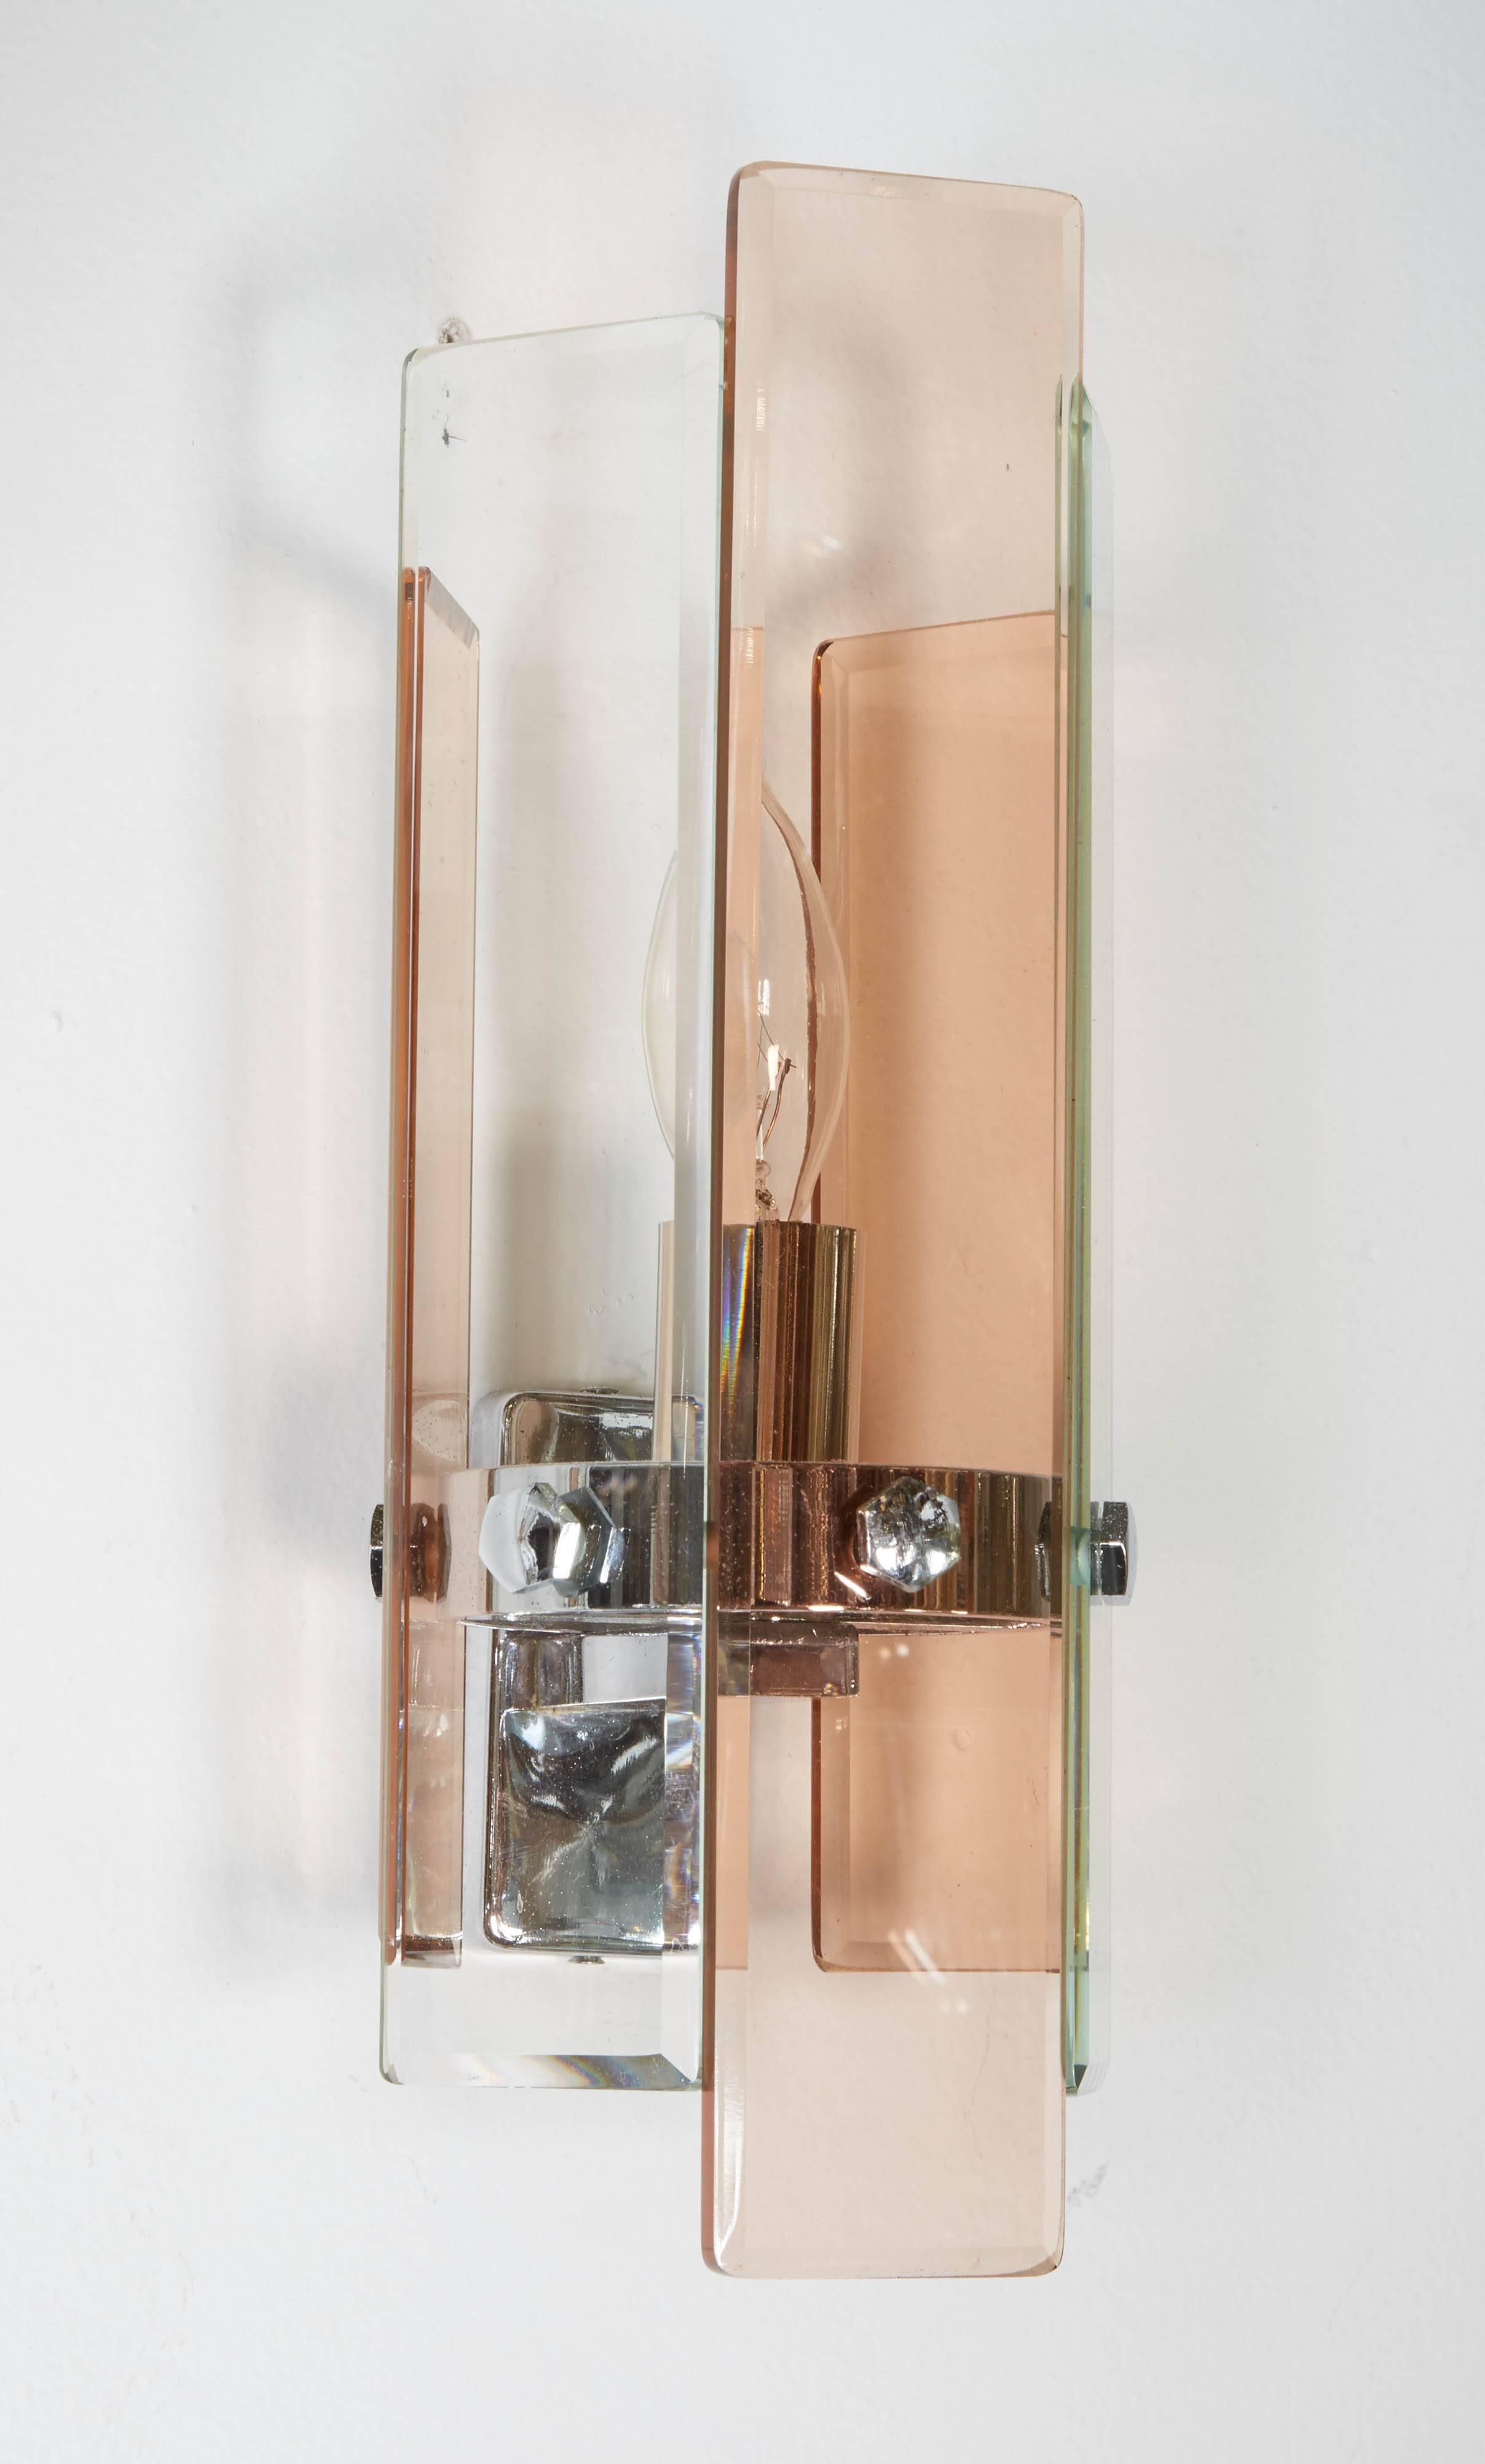 A pair of 1970s Art Deco revival sconces in polished chrome, clear and coral glass panels. Each sconce has a long central coral panel flanked by two shorter clear panels in turn flanked by two shorter coral panels. A total of five glass panels in a